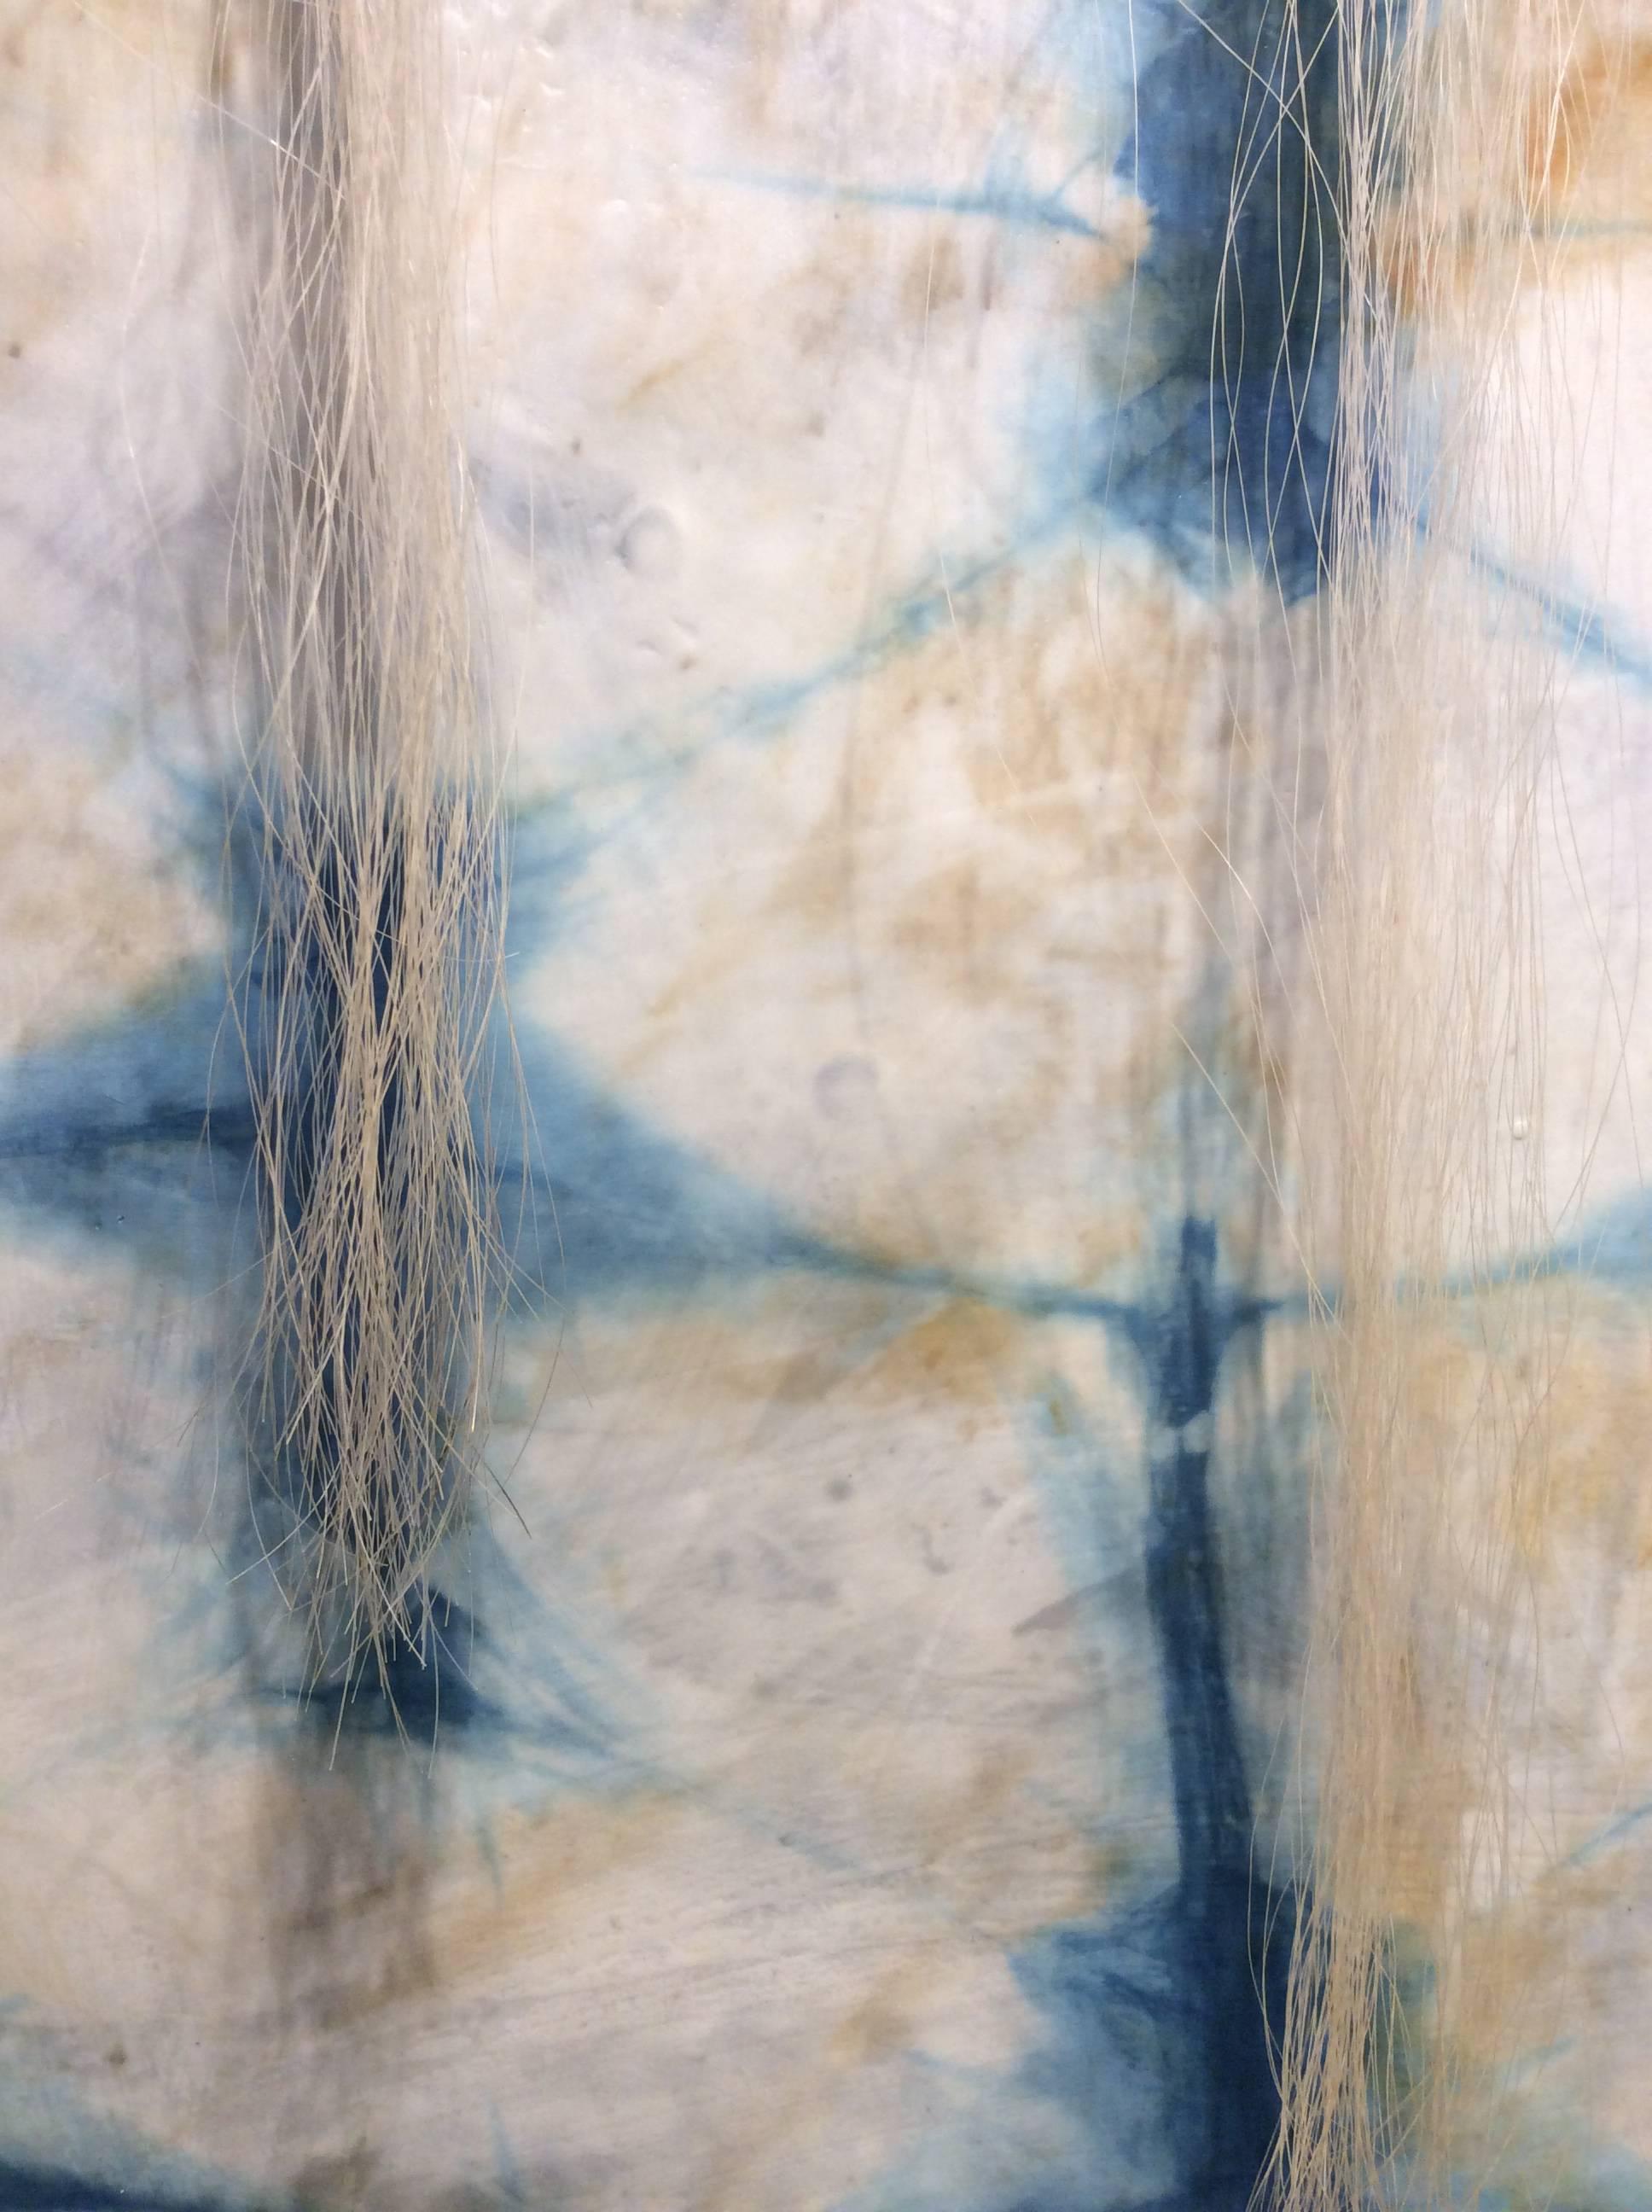 Hand dyed indigo silk and encaustic on wood panel
36 x 36 inches

This contemporary pattern-based abstract silk and encaustic work on panel was created by San Francisco-based artist Susan Stover as part of her Indigo series, so-named for the